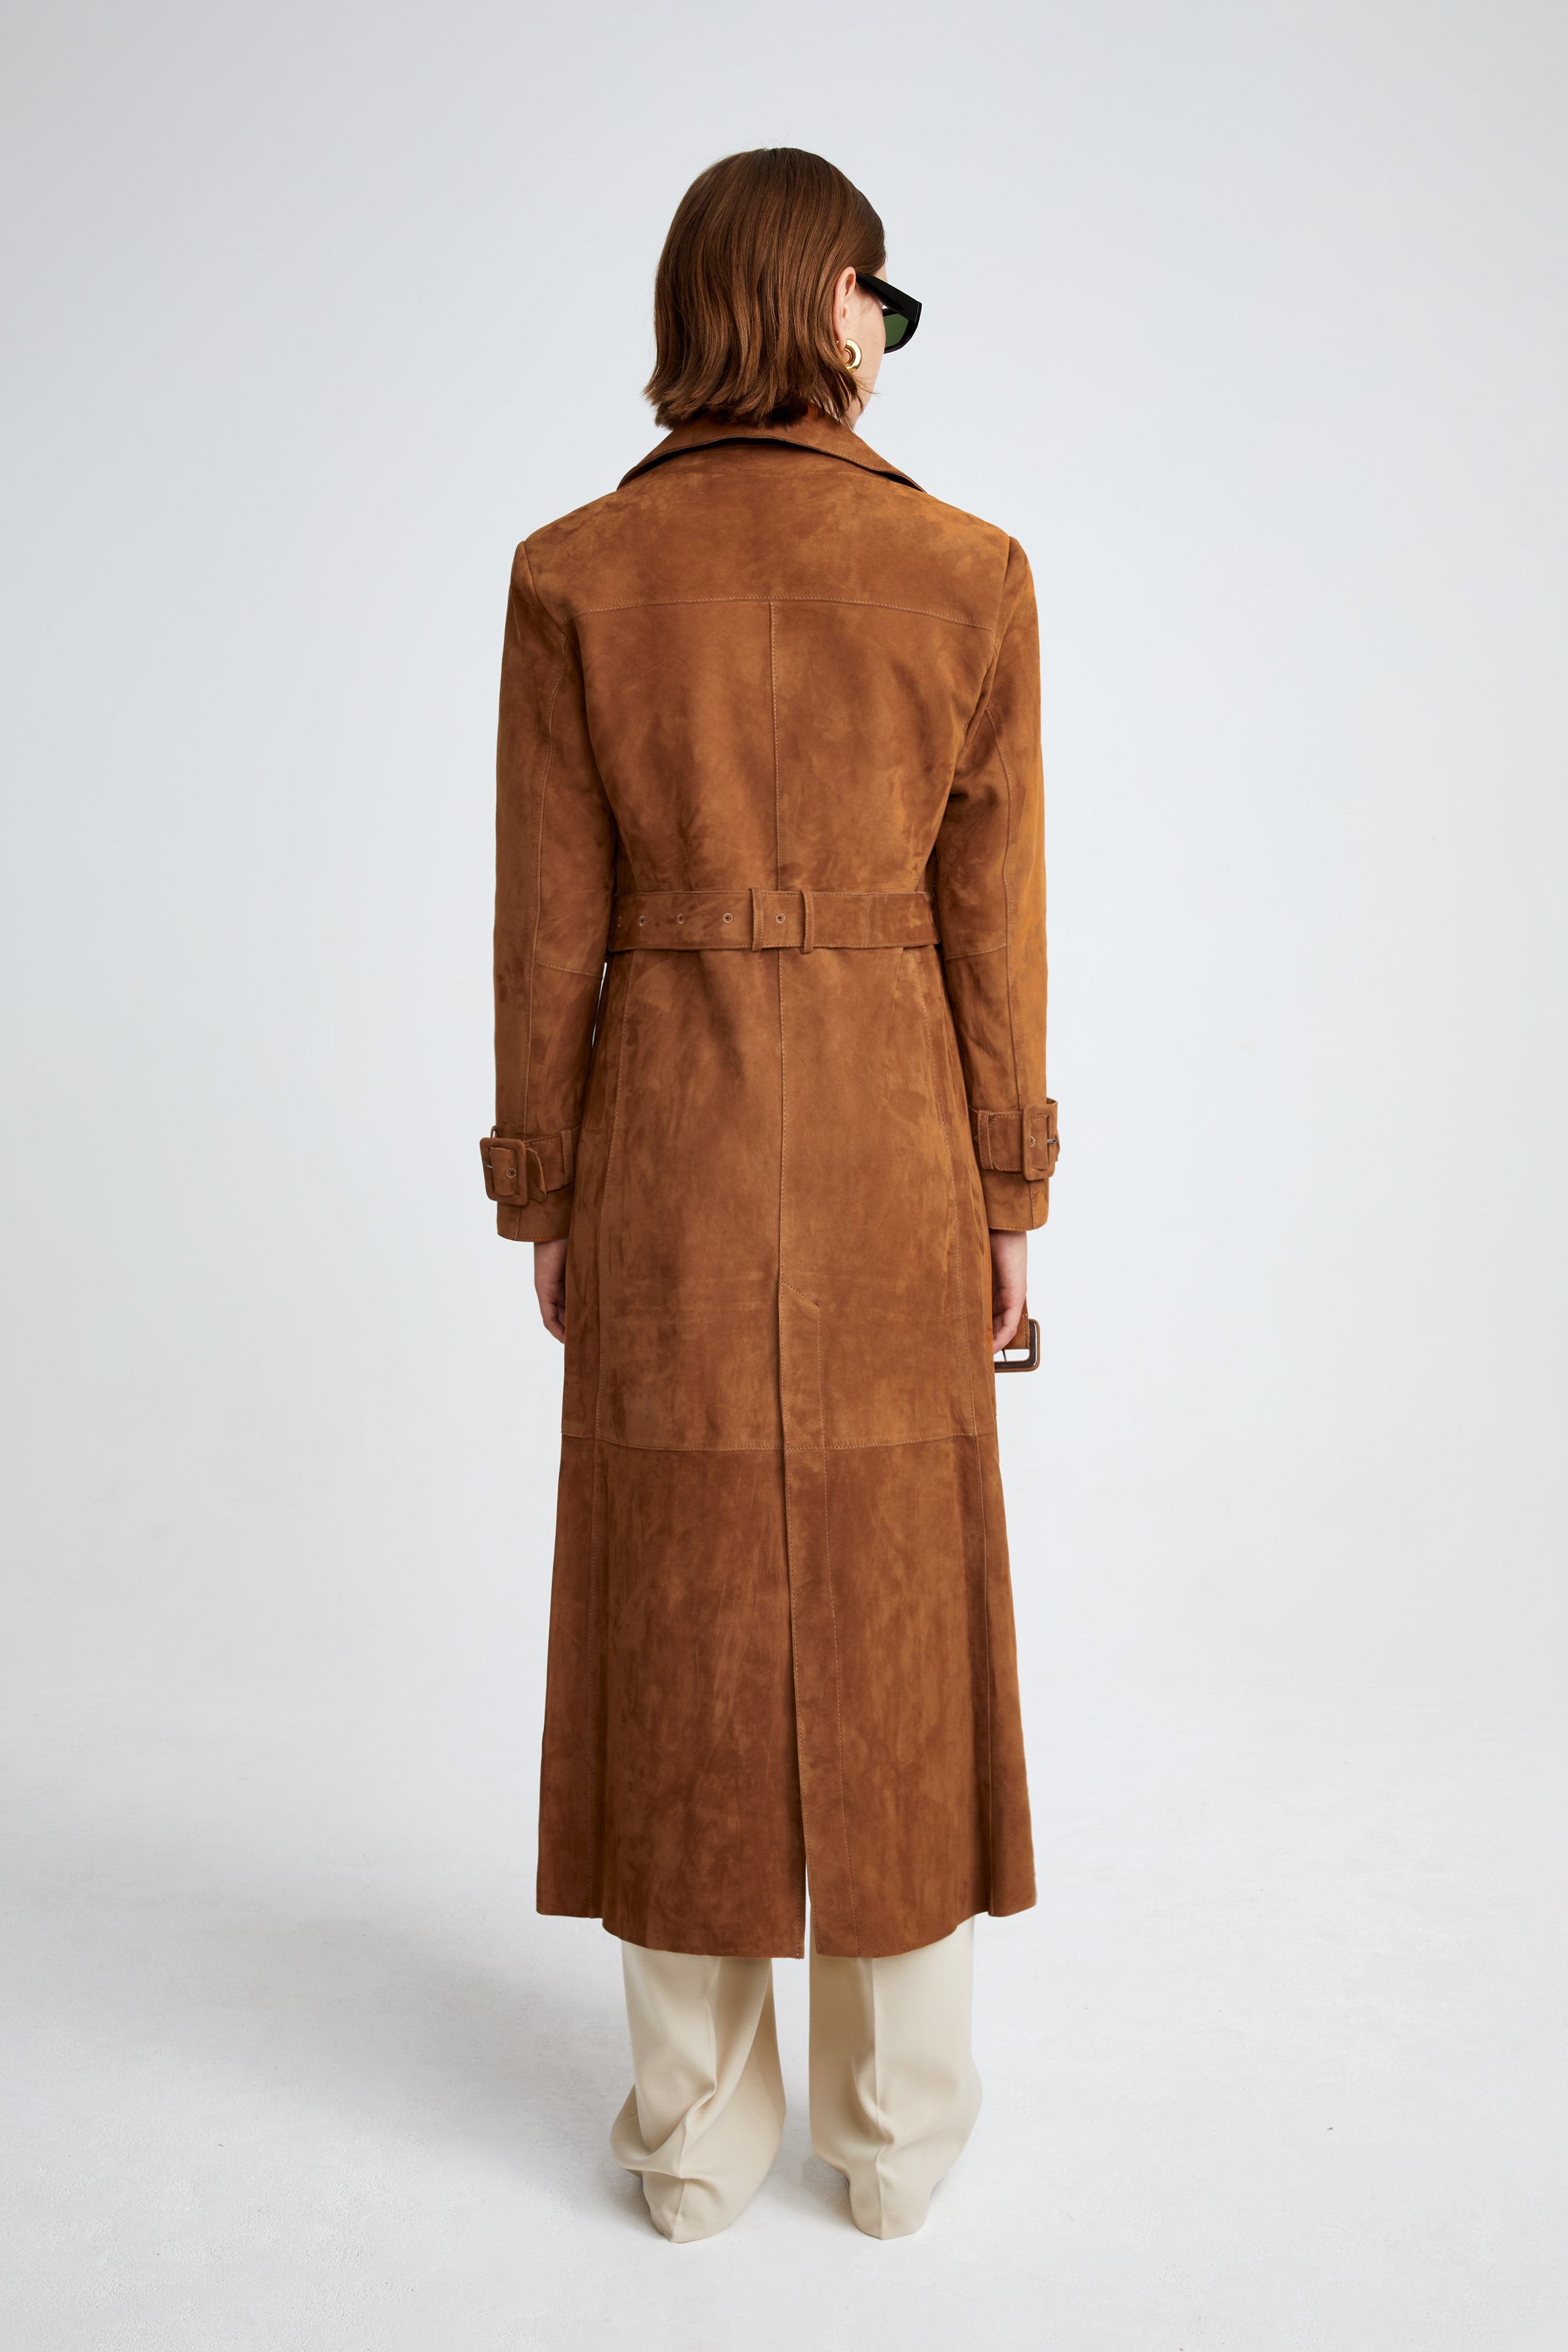 Model is wearing the Tate Caramel Everyday Suede Trench Coat Back